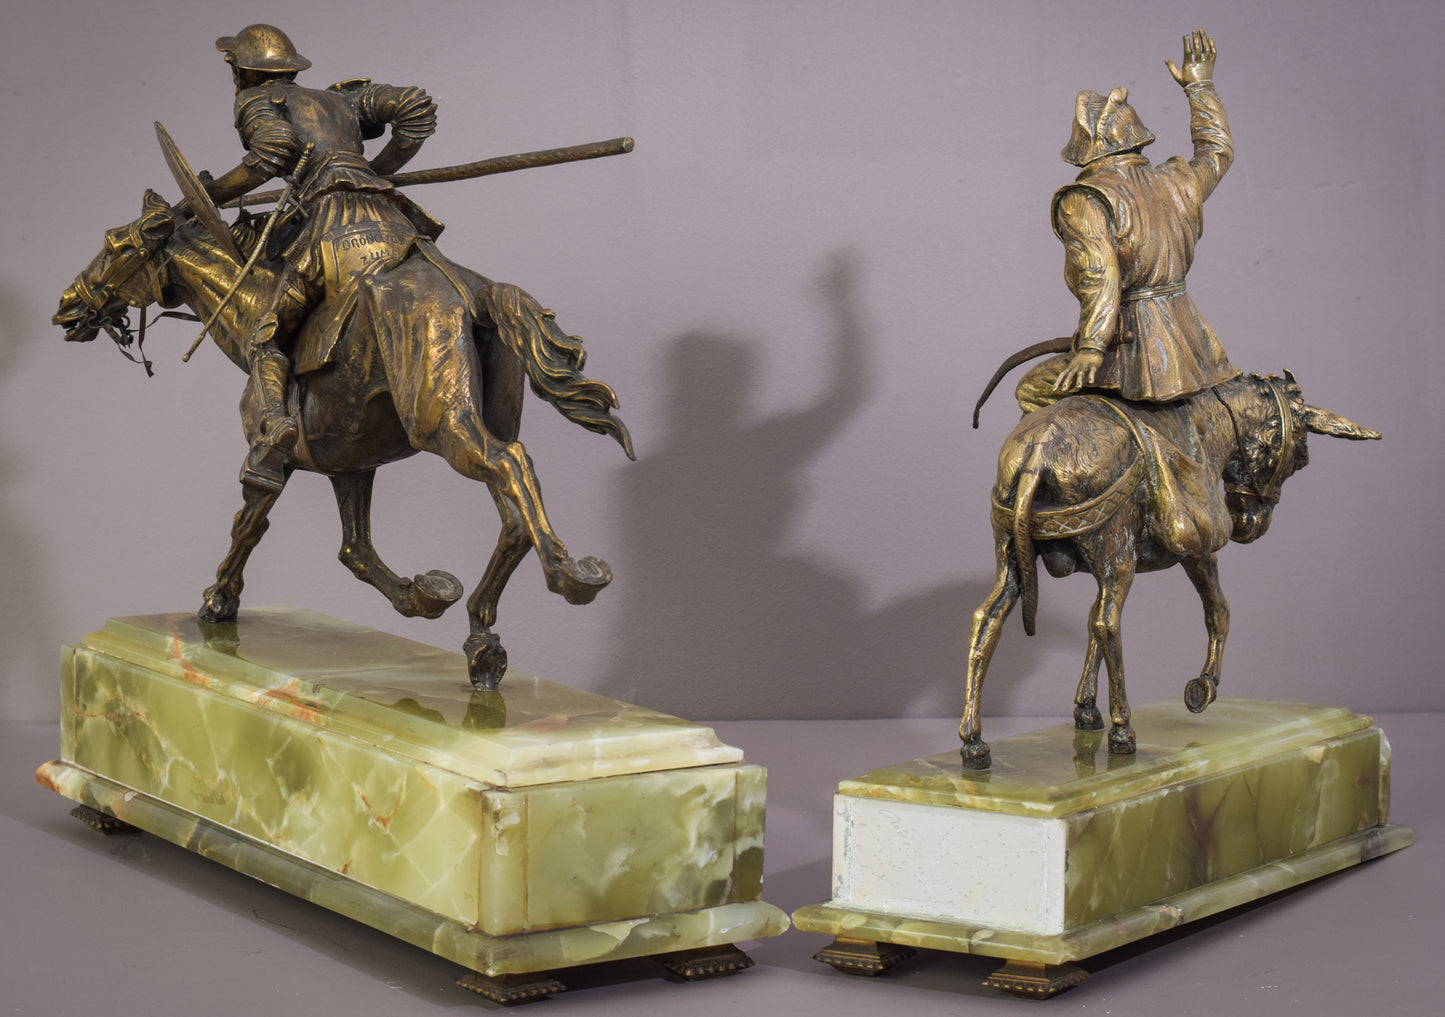 Bronze Group of El Cid and Jerónimo